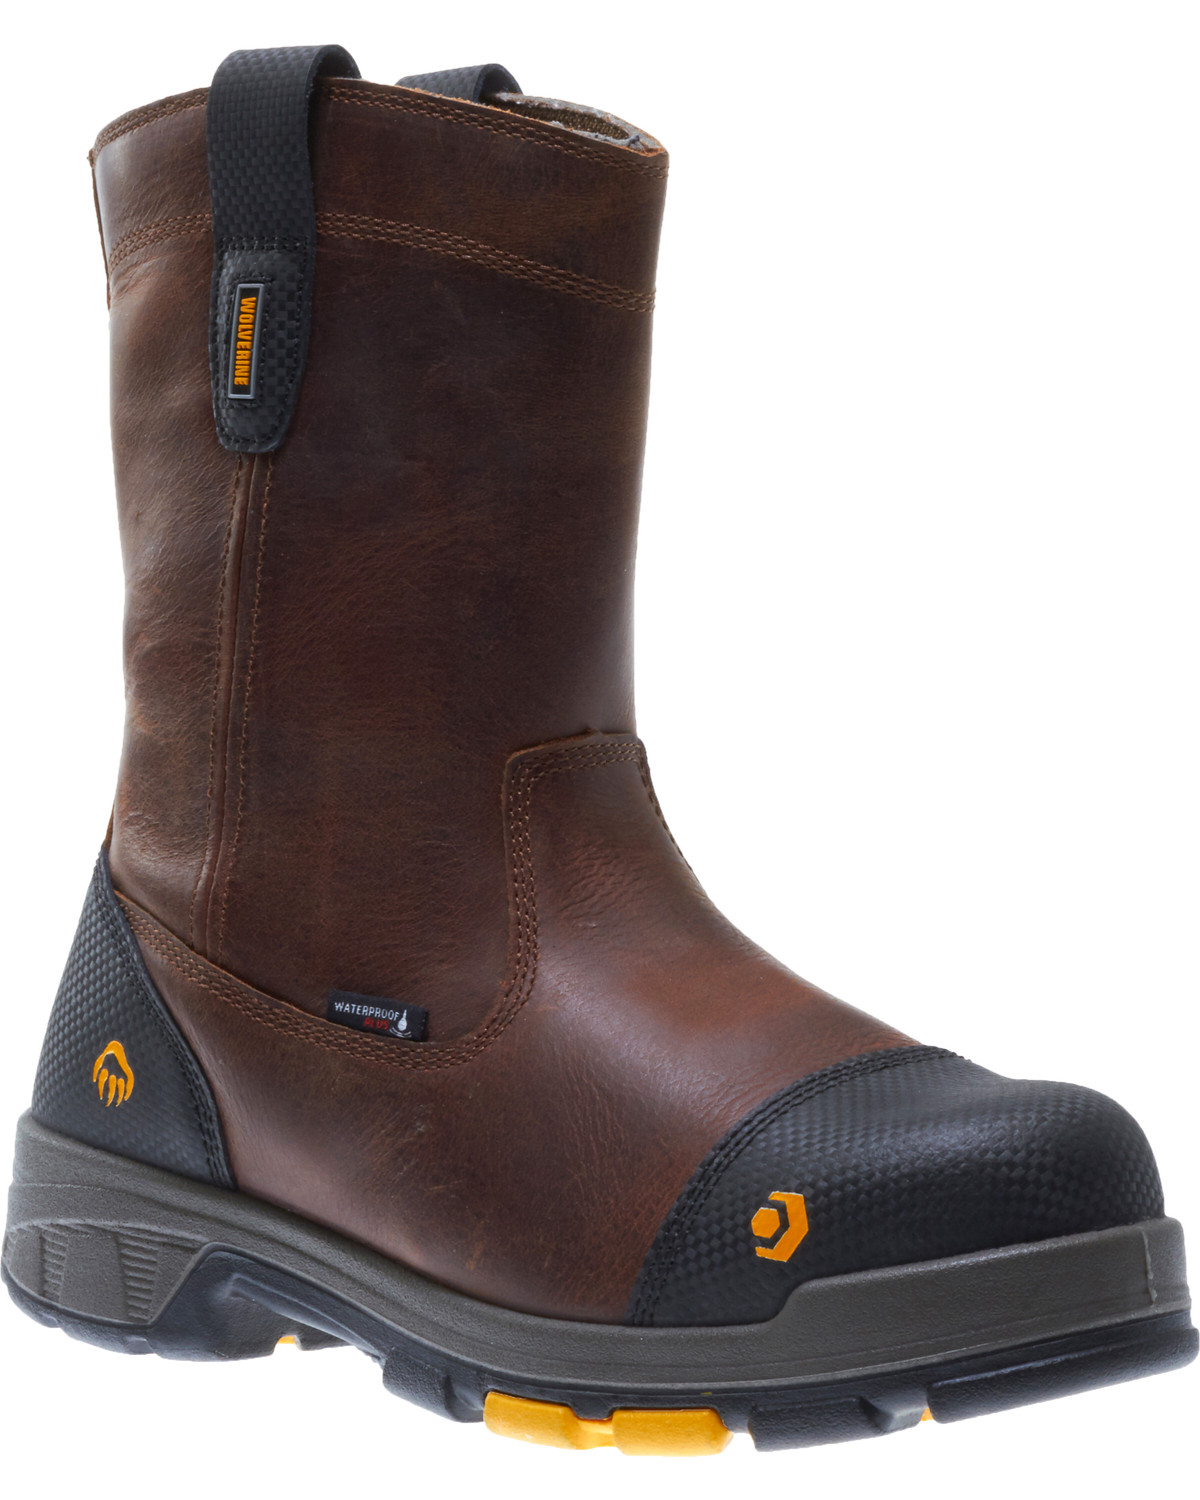 wolverine composite toe work boots